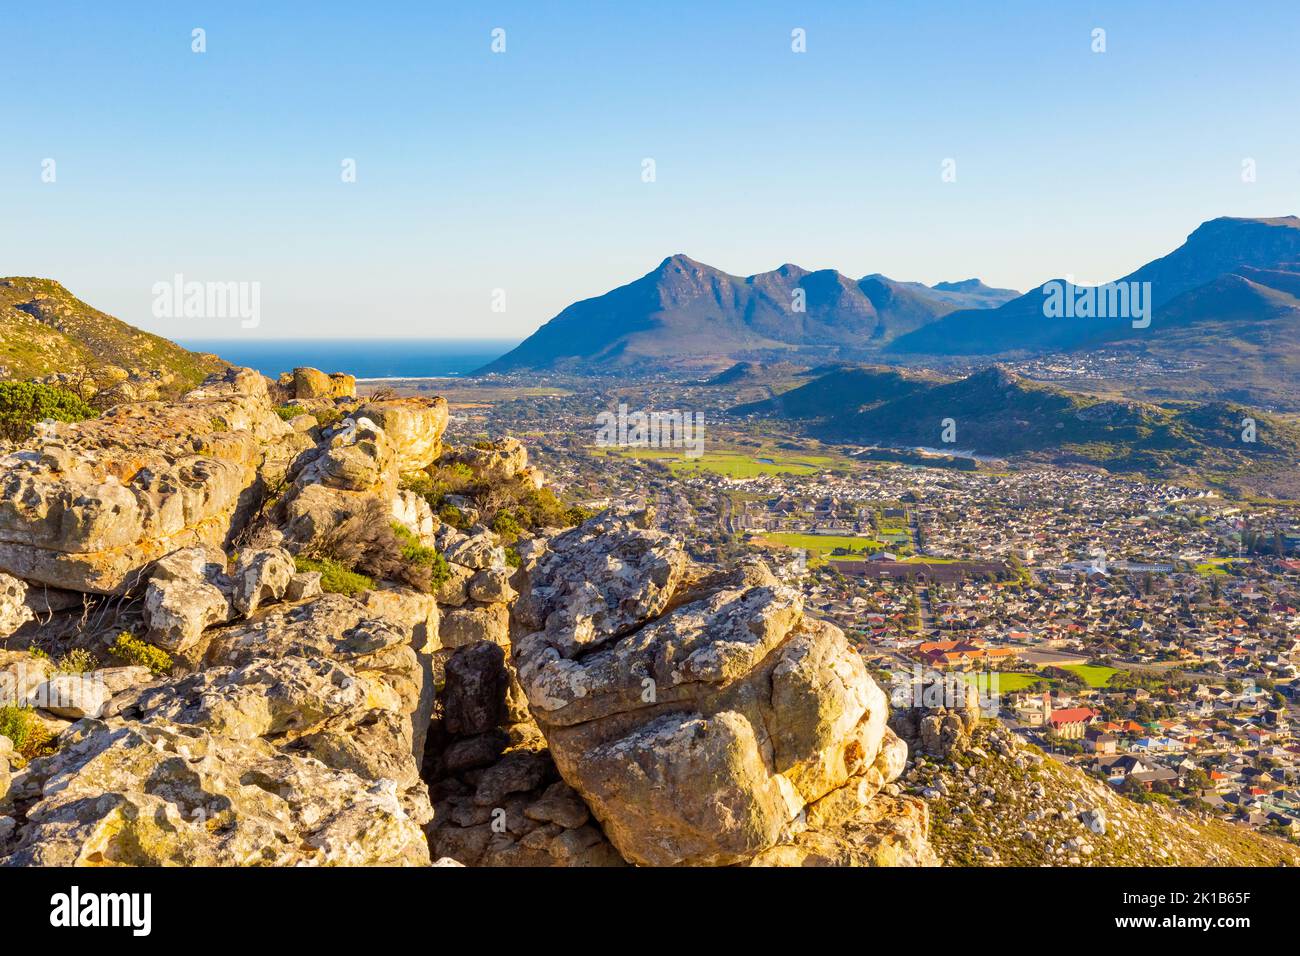 Fish Hoek residential neighborhood viewed from the top of local mountain range Stock Photo